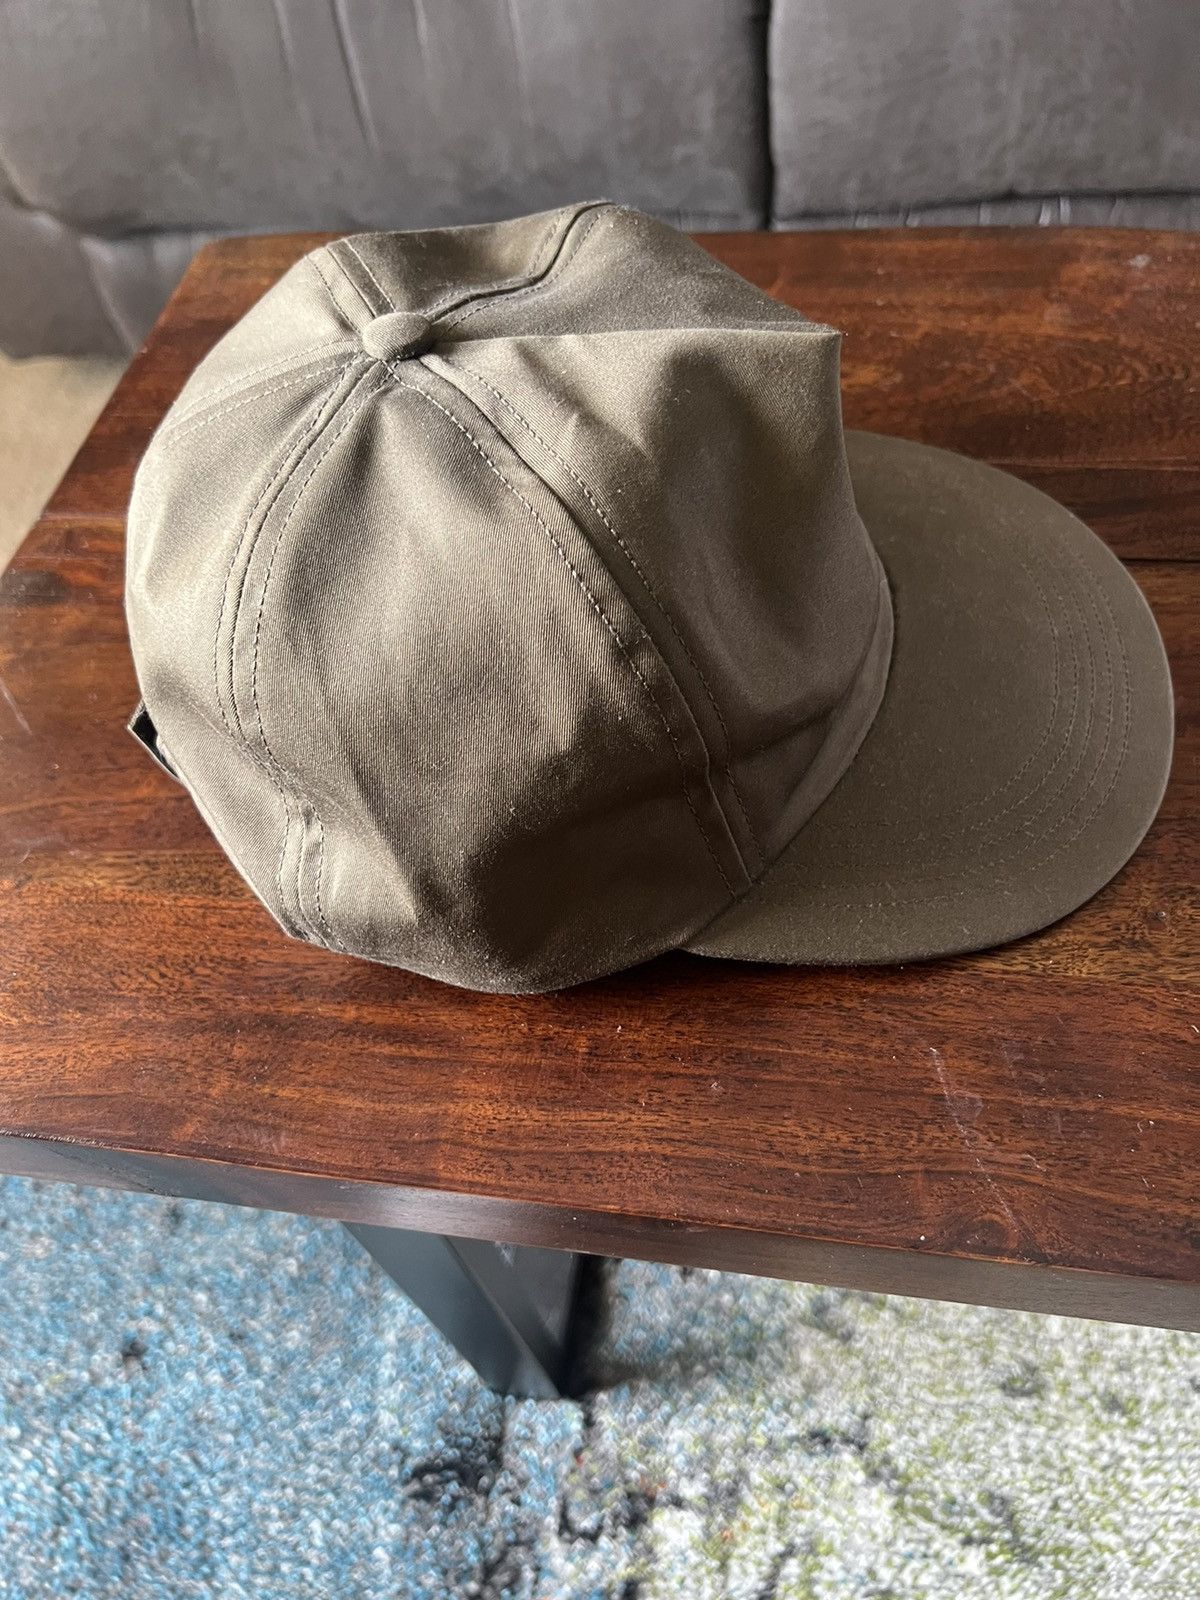 Fear of God Fear of god 5 panel hat Seventh collection | Grailed